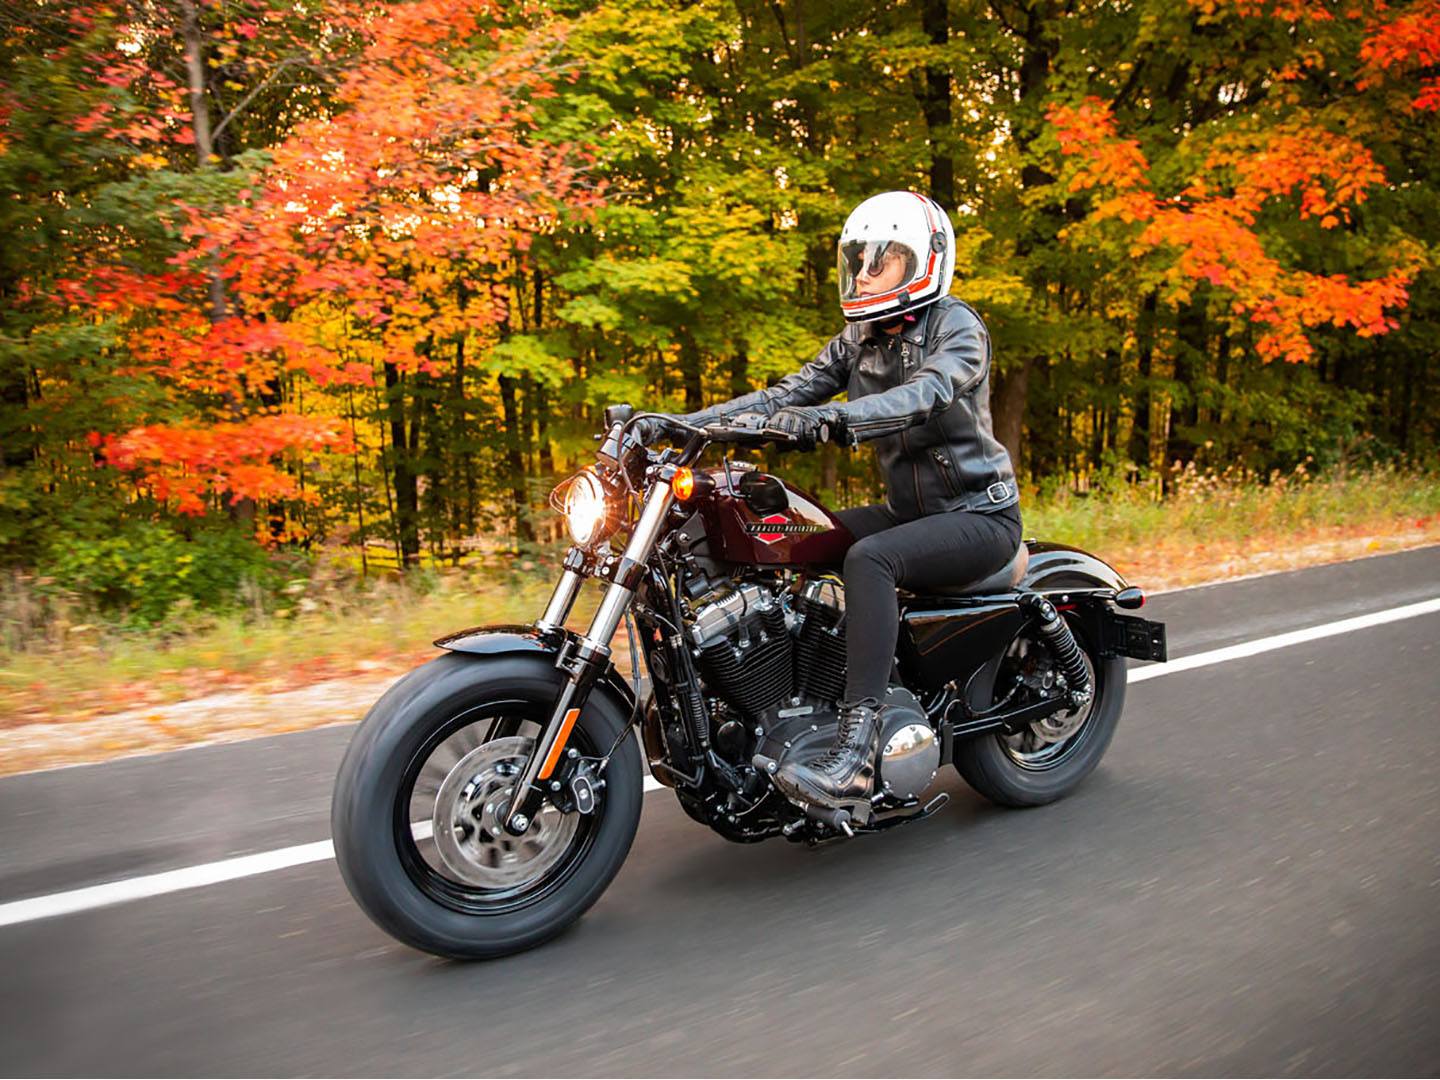 2021 Harley-Davidson Forty-Eight® in Rochester, Minnesota - Photo 18